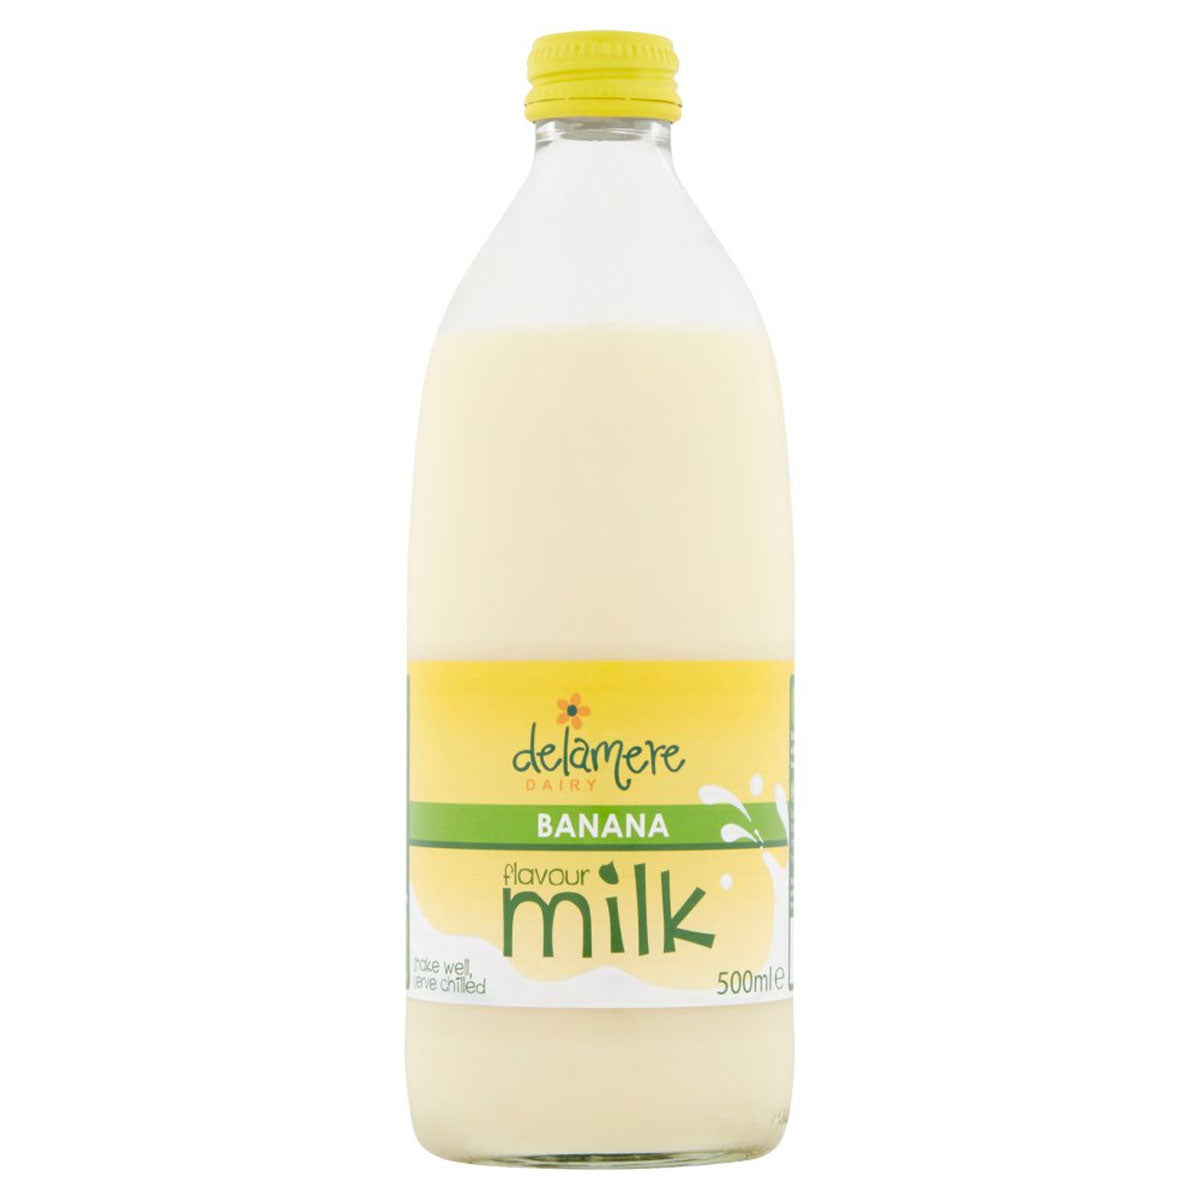 Delamere - Dairy Banana Flavour Milk - 500ml - Continental Food Store